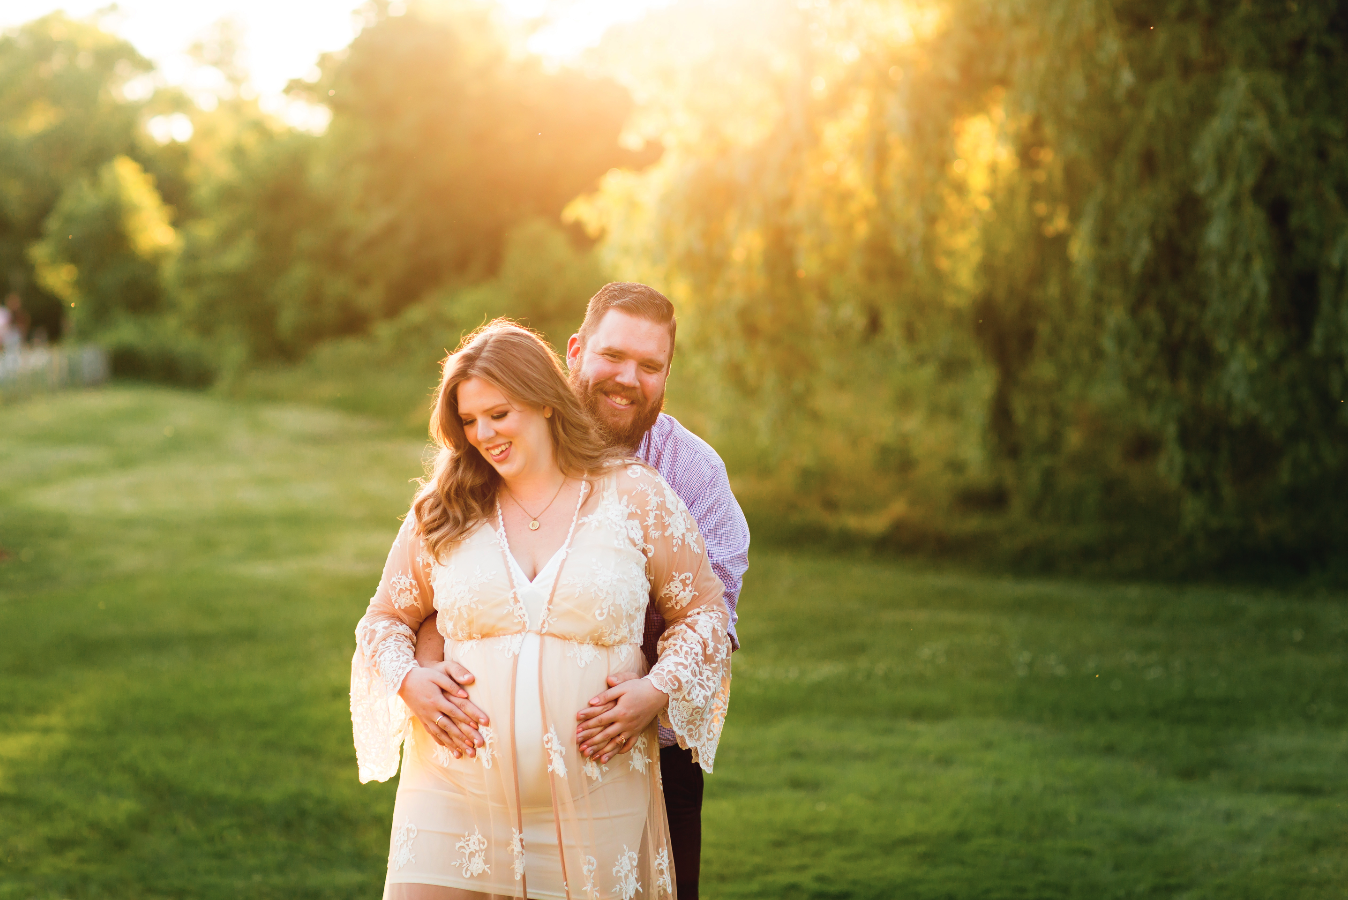 Maternity-Session-Photographer-Hamilton-Oakville-Waterfront-Golden-Hour-Glow-Photography-Moments-by-Lauren-Photo-Image-4.png